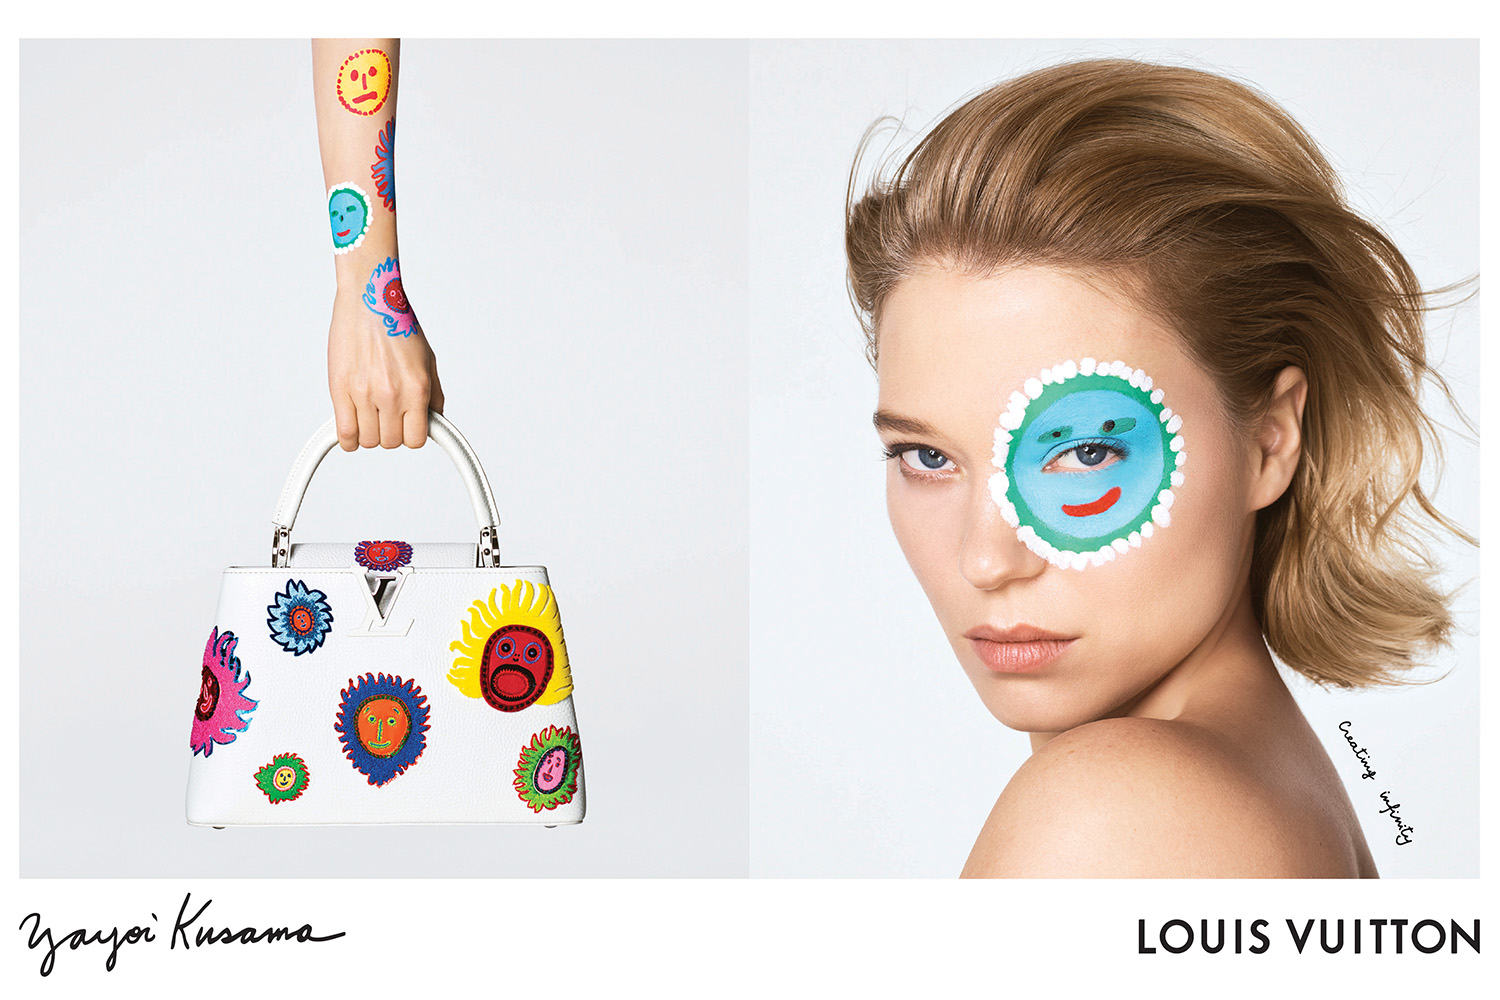 Creating Infinity: Louis Vuitton Unveils Drop 2 Of The Yayoi Kusama Campaign With A Star-Studded Cast